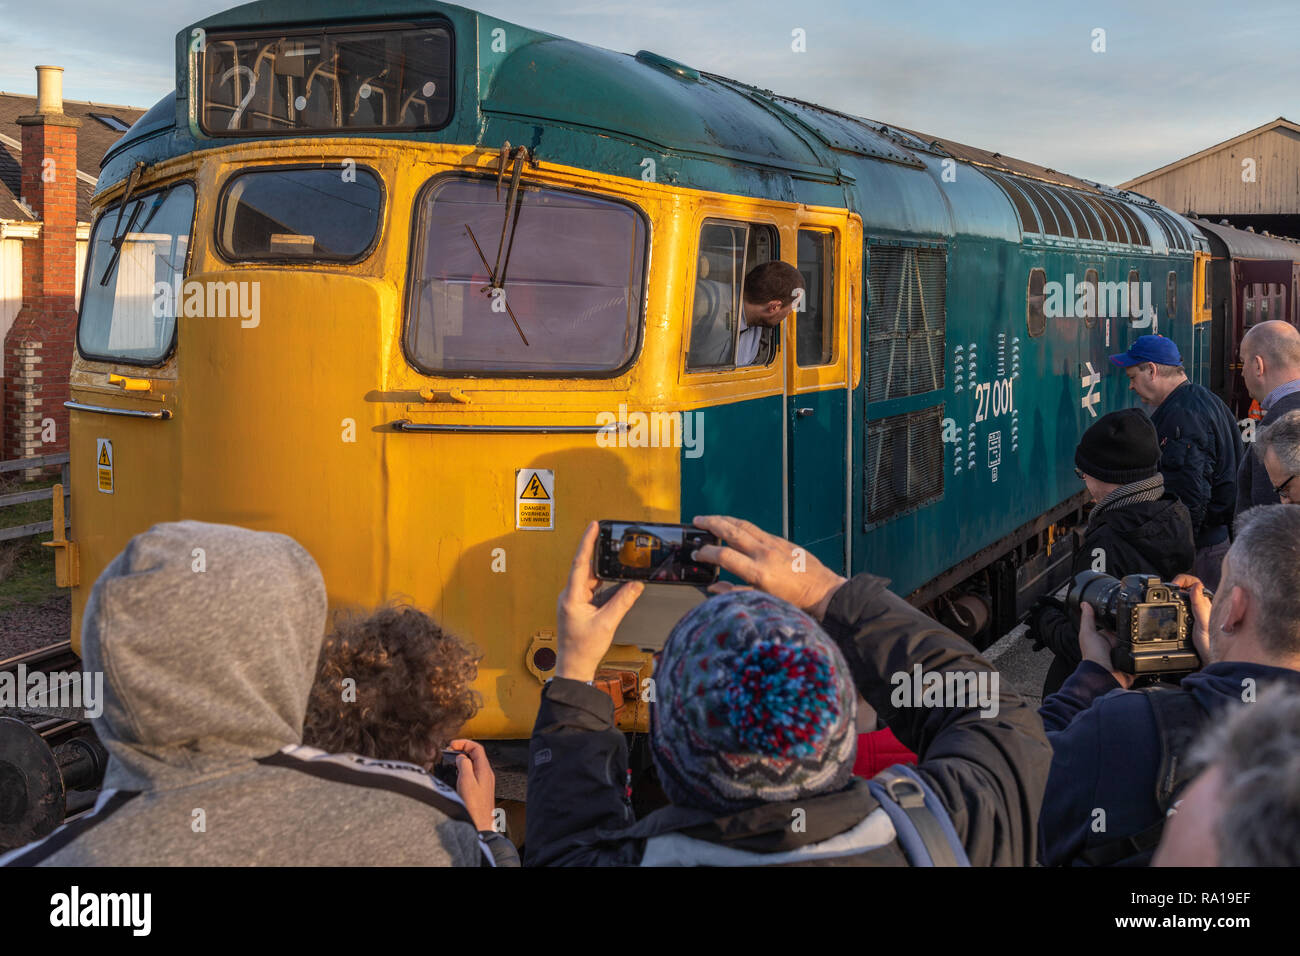 Bo’ness, Scotland, UK. 29th December 2018. The Bo’ness and Kinneil Railway annual Winter Diesel Gala attracts hundreds of train enthusiasts from all over the UK. The event features guest diesel locomotives pulling a passenger train along the 5 mile long line from Bo’ness Station to Manuel Station. © Garry Cornes / Alamy Live News  Stock Photo